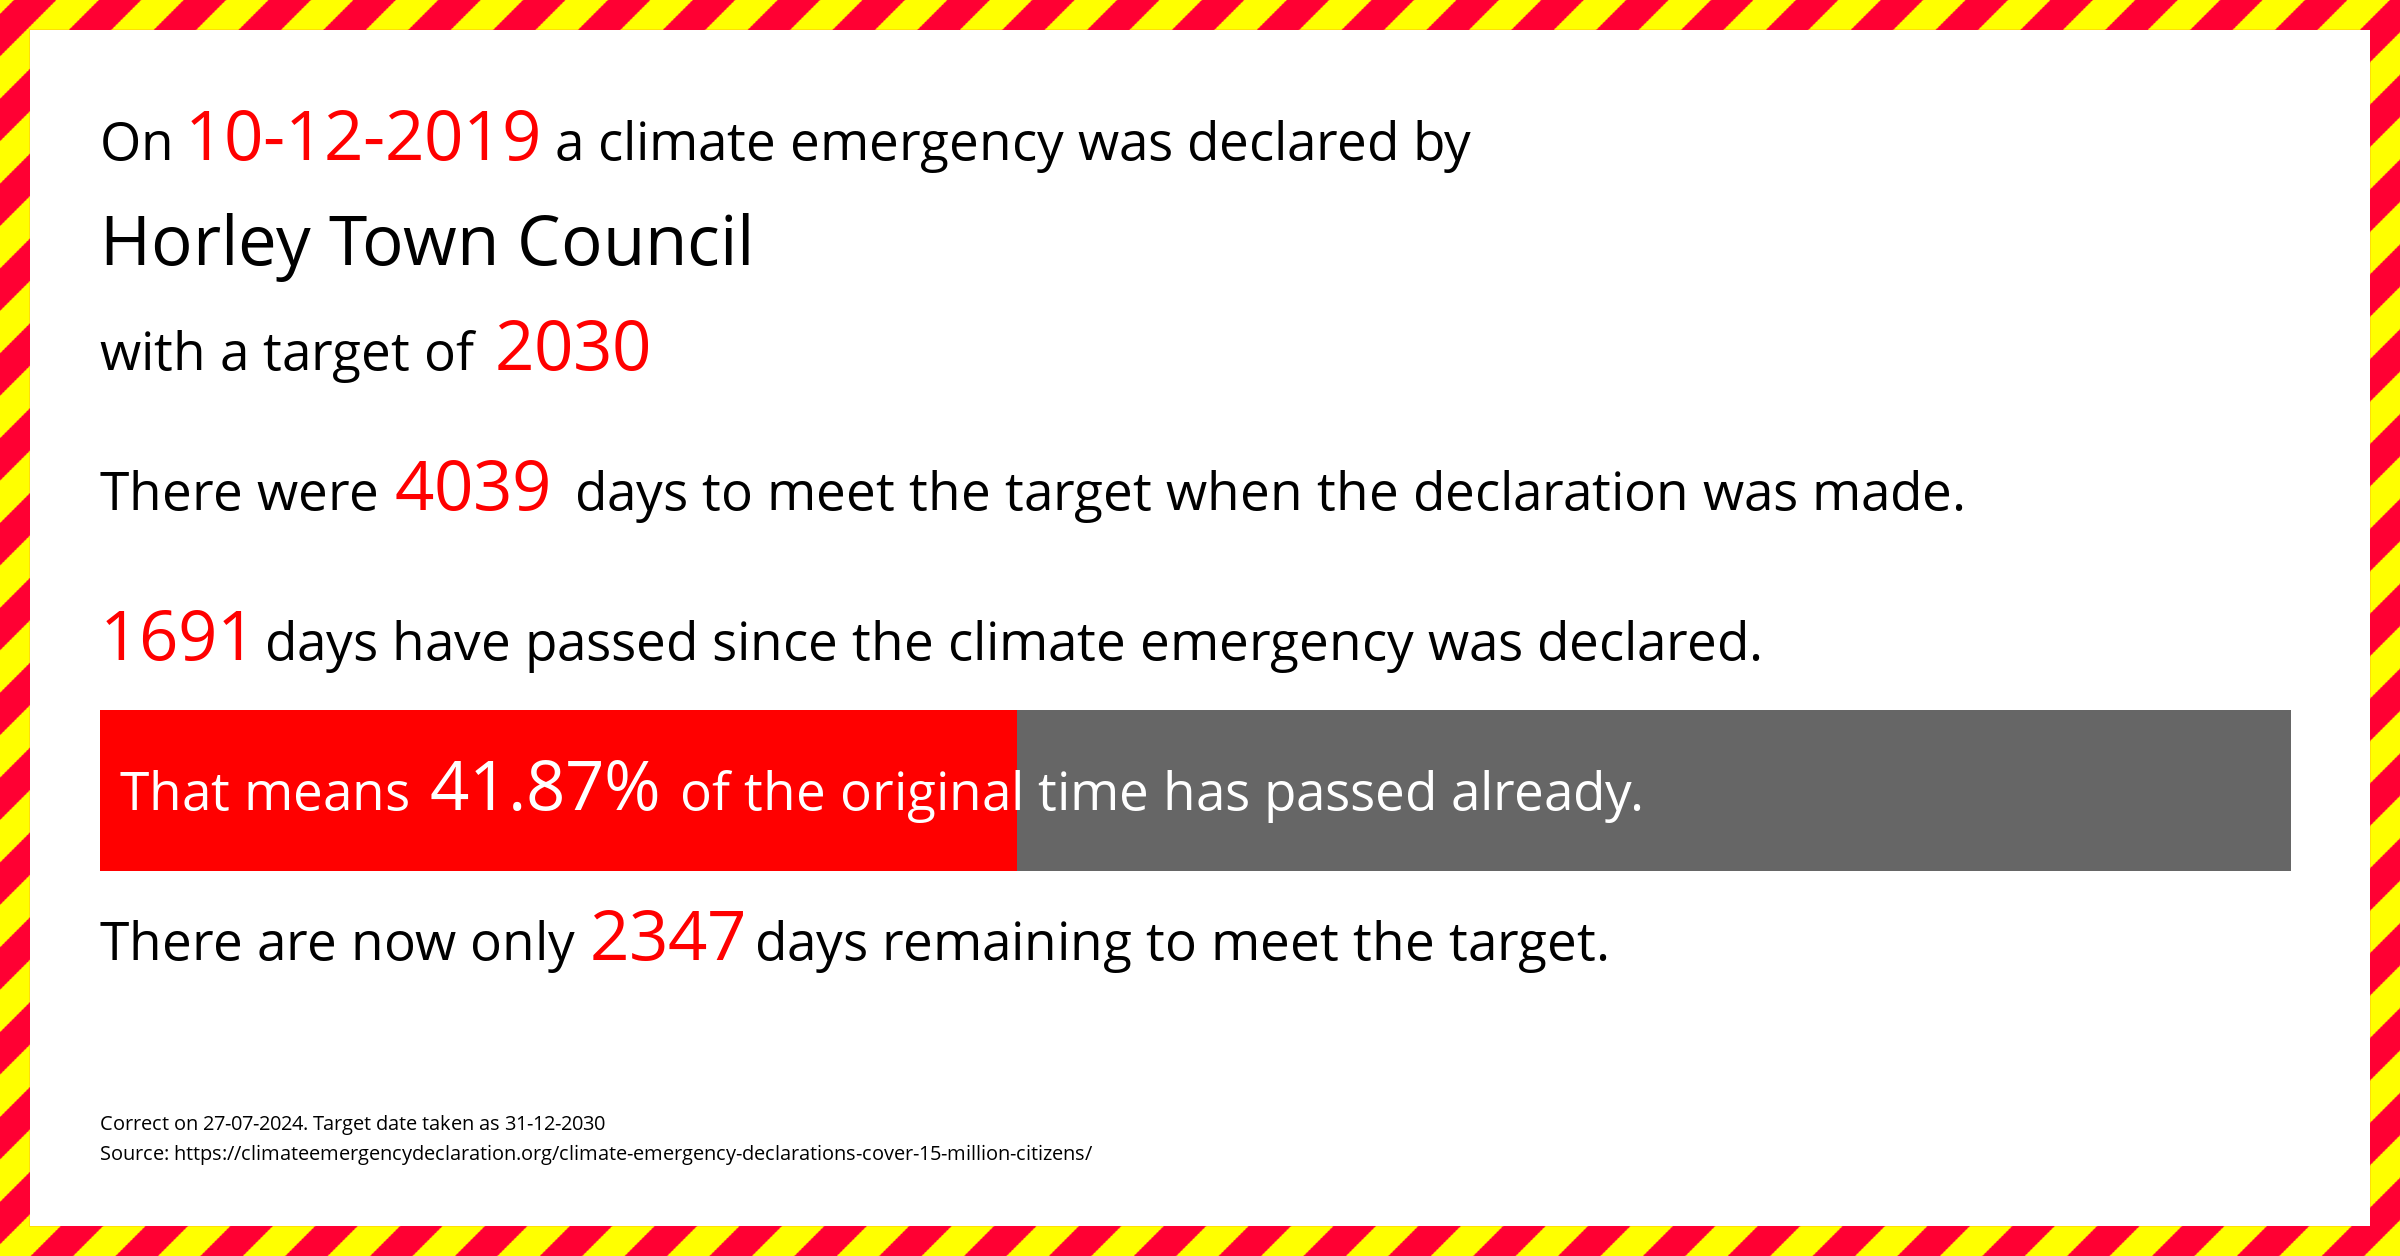 Horley Town Council declared a Climate emergency on Tuesday 10th December 2019, with a target of 2030.